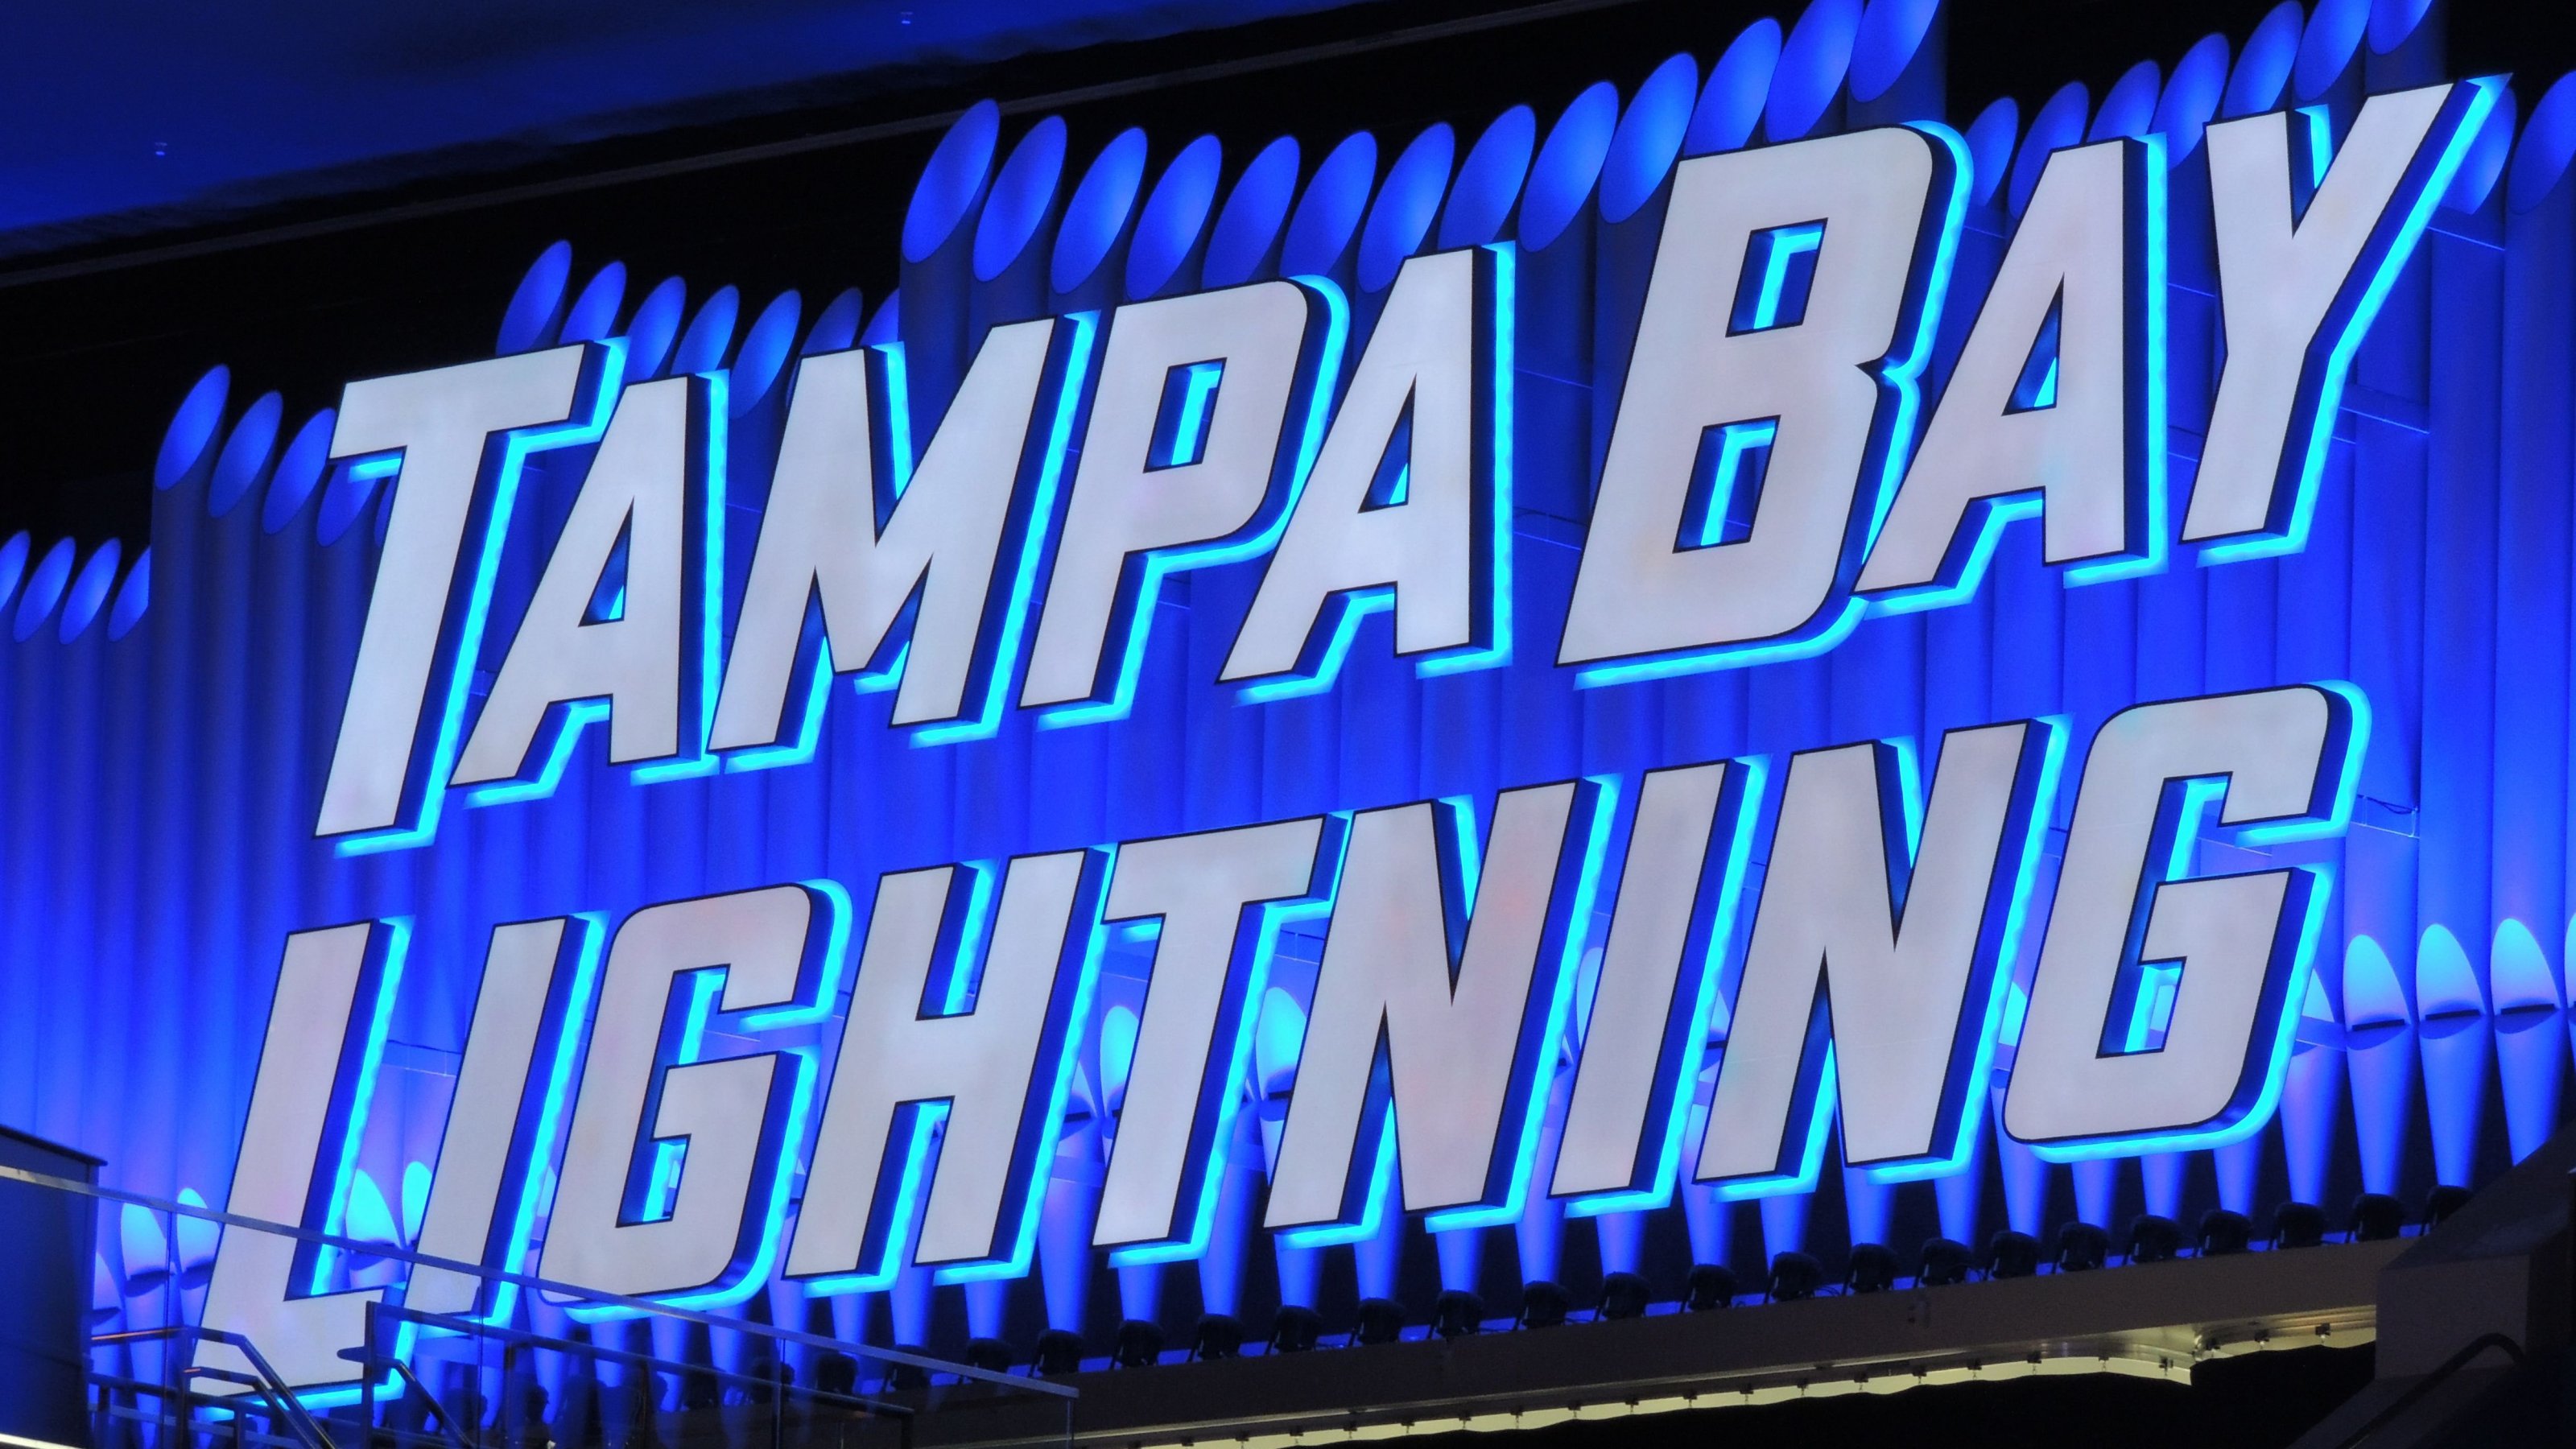 Download Tampa Bay Lightning wallpapers for mobile phone, free